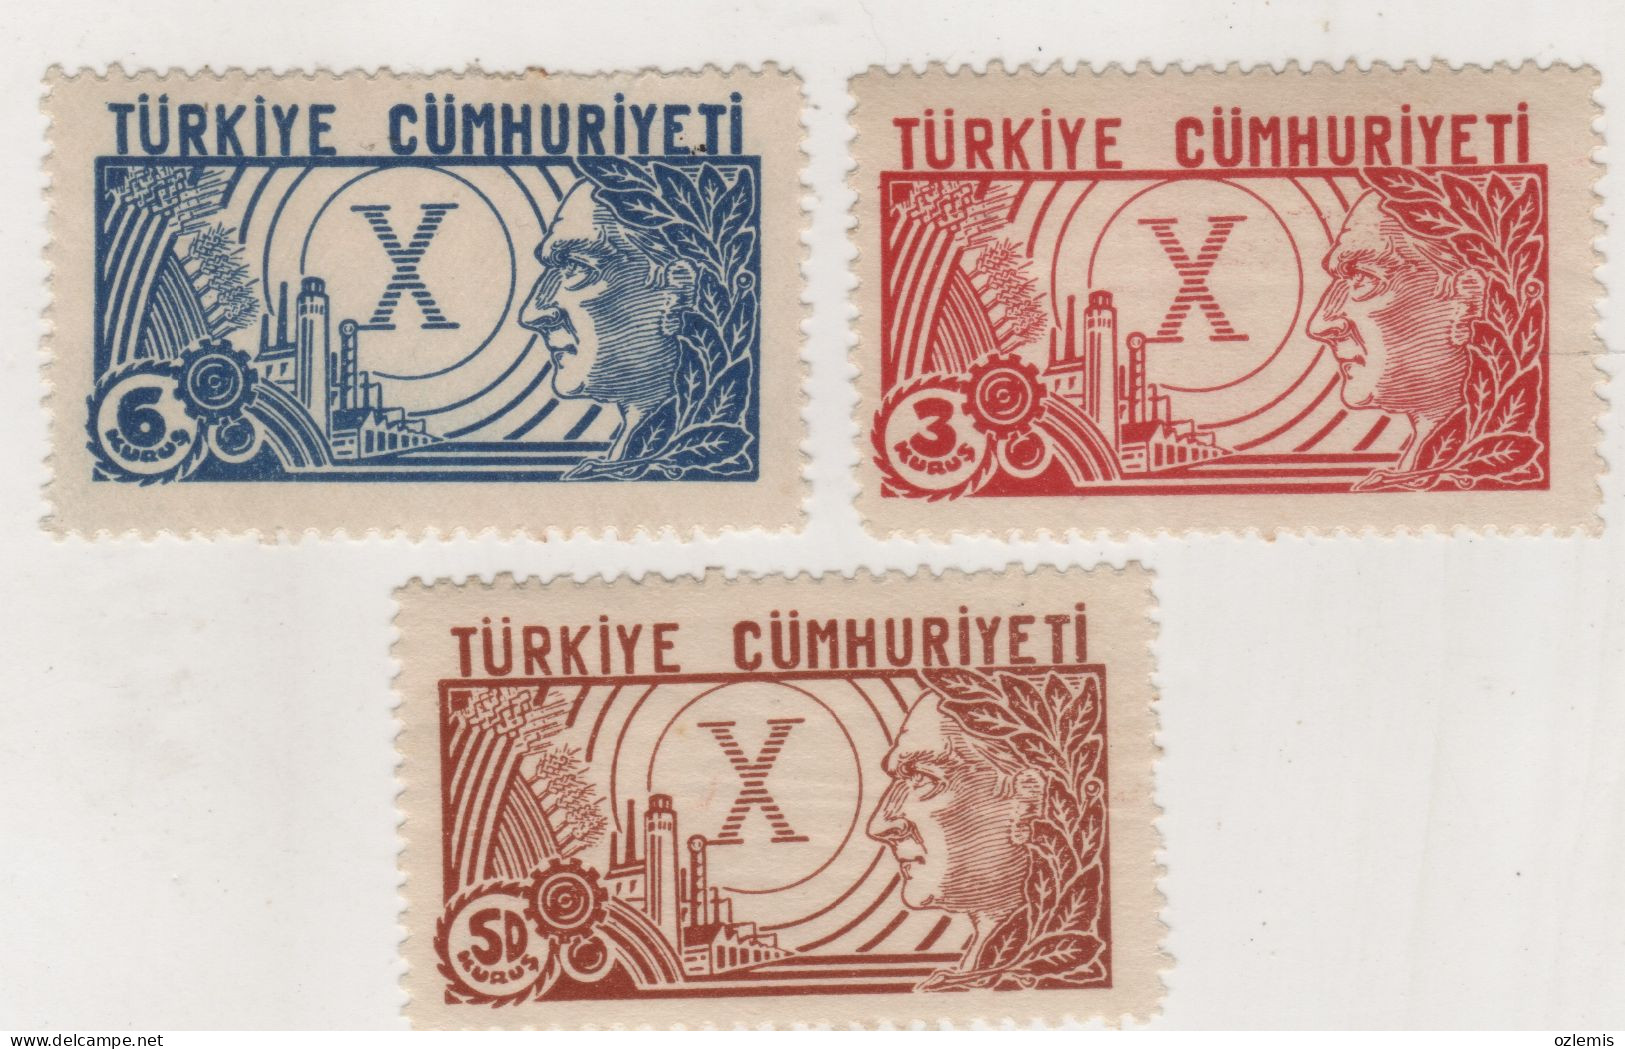 TURKEY,TURKEI,TURQUIE ,1933 ,COMMEMORATIVE STAMPS FOR THE 100TH ANIVERSARY OF THE REPUBLIC,,,STAMP,MNH - Ungebraucht